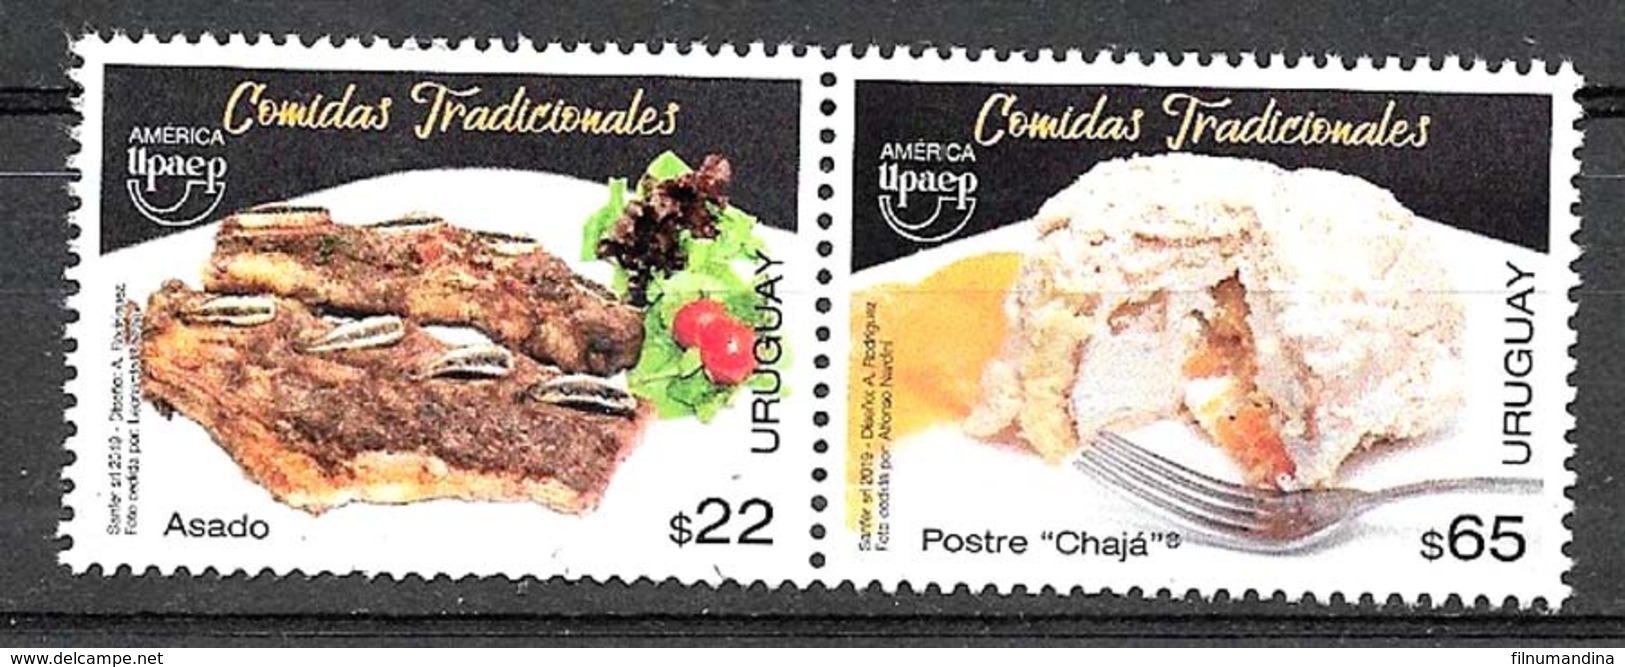 FF01-URUGUAY 2019 UPAEP AMERICA,TRADITIONAL FOODS,MEALS PAIR NEUF,MINT MNH,POSTFRICH - Uruguay